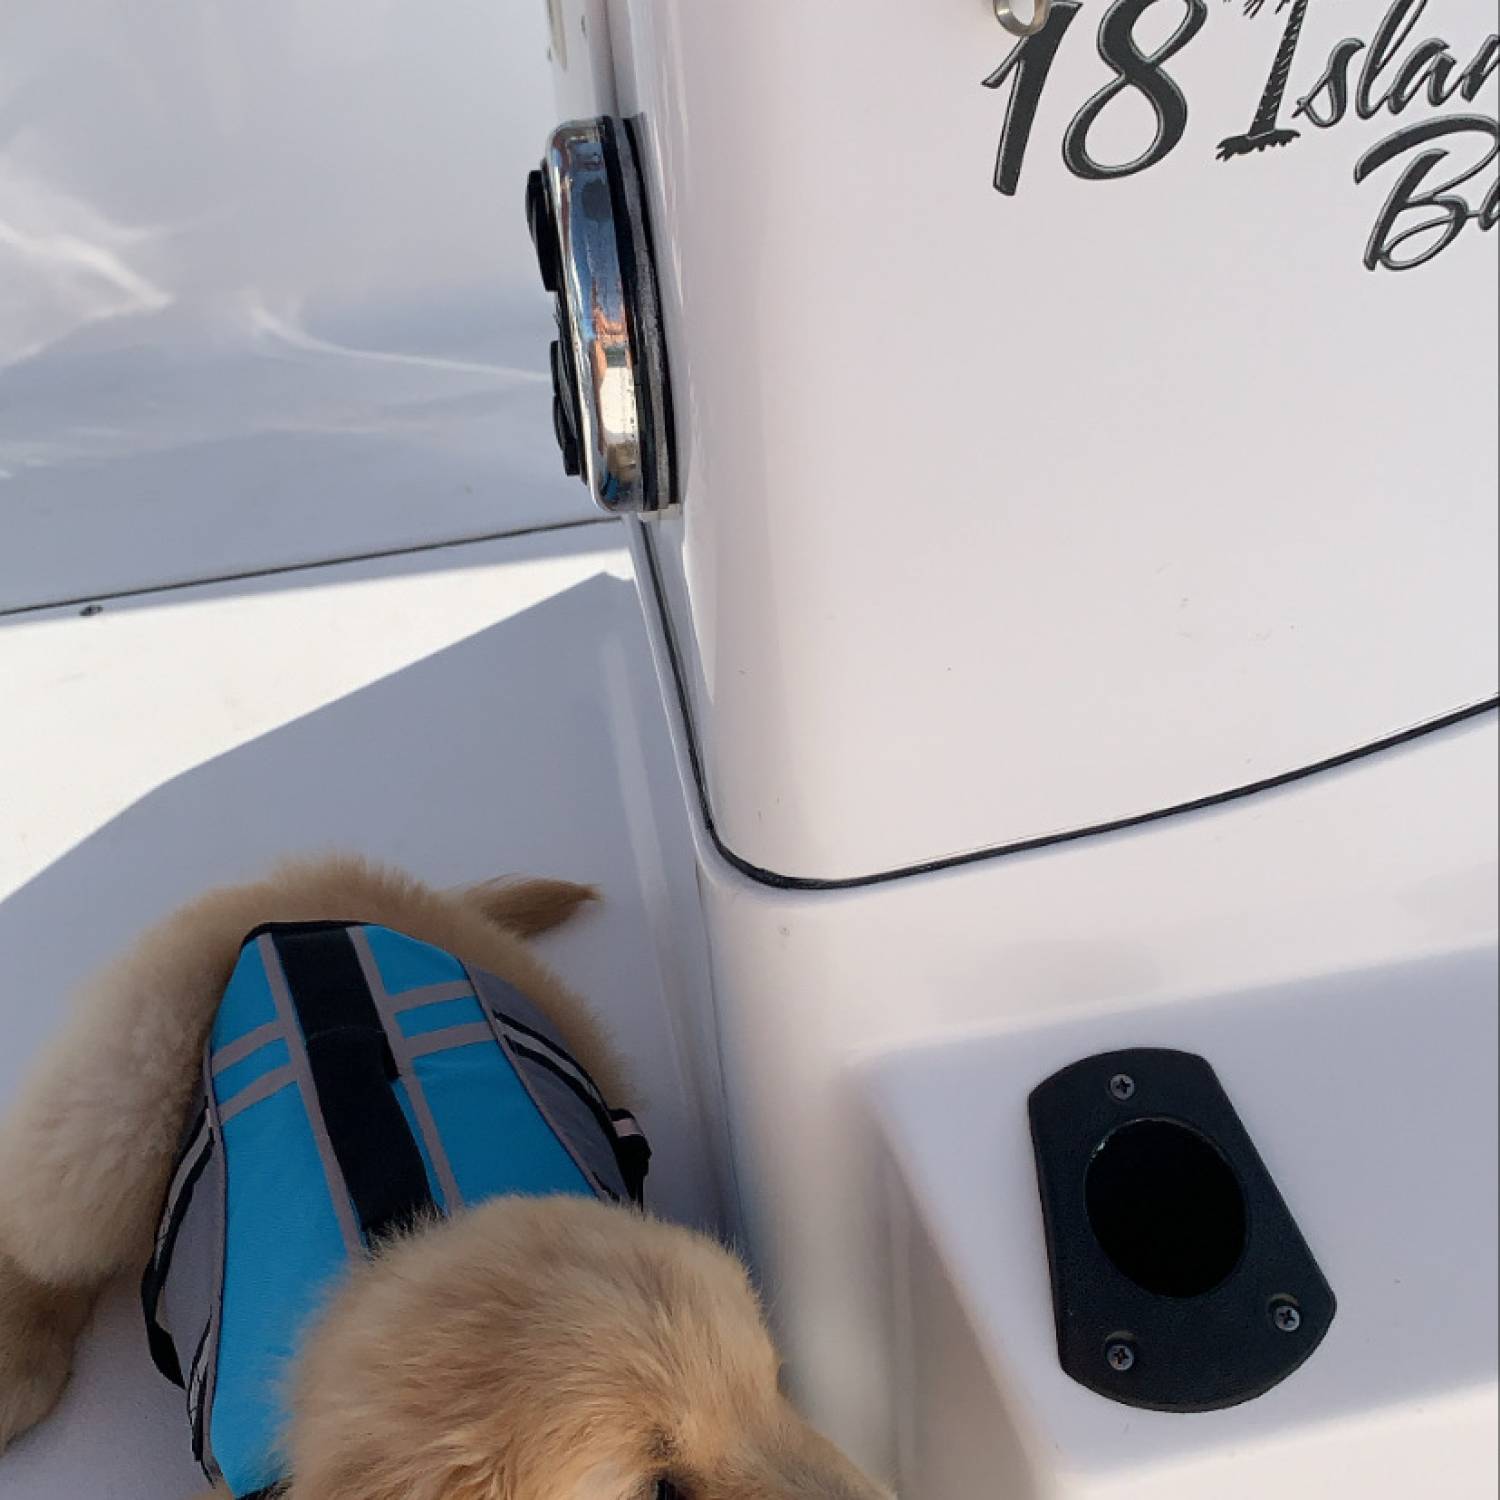 Tiller’s First Ride. First of many boat rides for this pup!